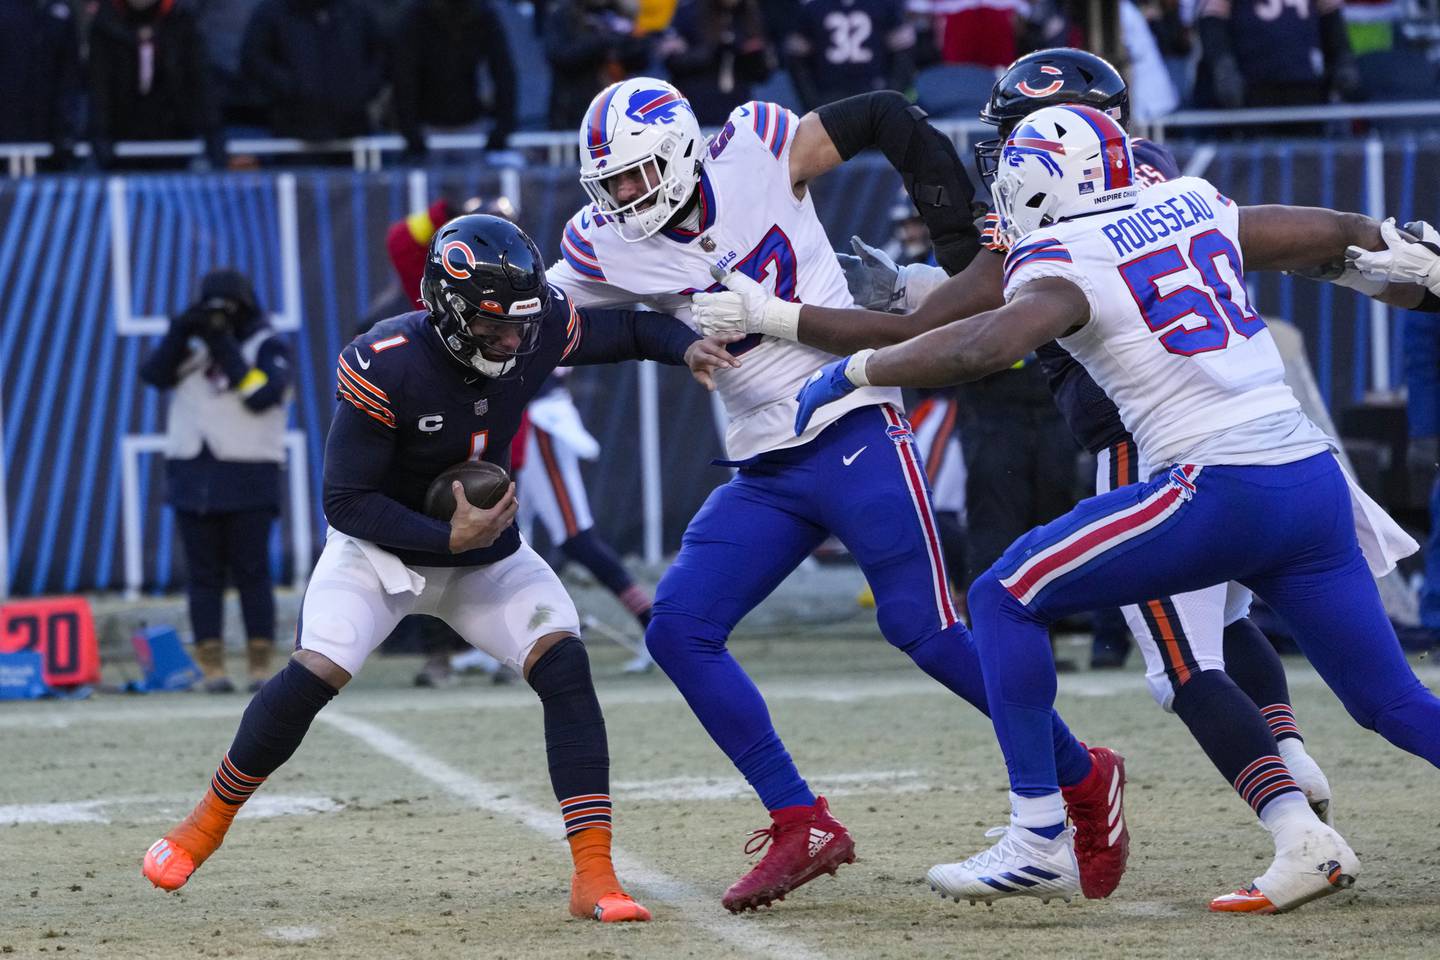 Chicago Bears quarterback Justin Fields (1) is sacked by Buffalo Bills defensive end A.J. Epenesa (57) in the second half of an NFL football game in Chicago, Saturday, Dec. 24, 2022. (AP Photo/Charles Rex Arbogast)